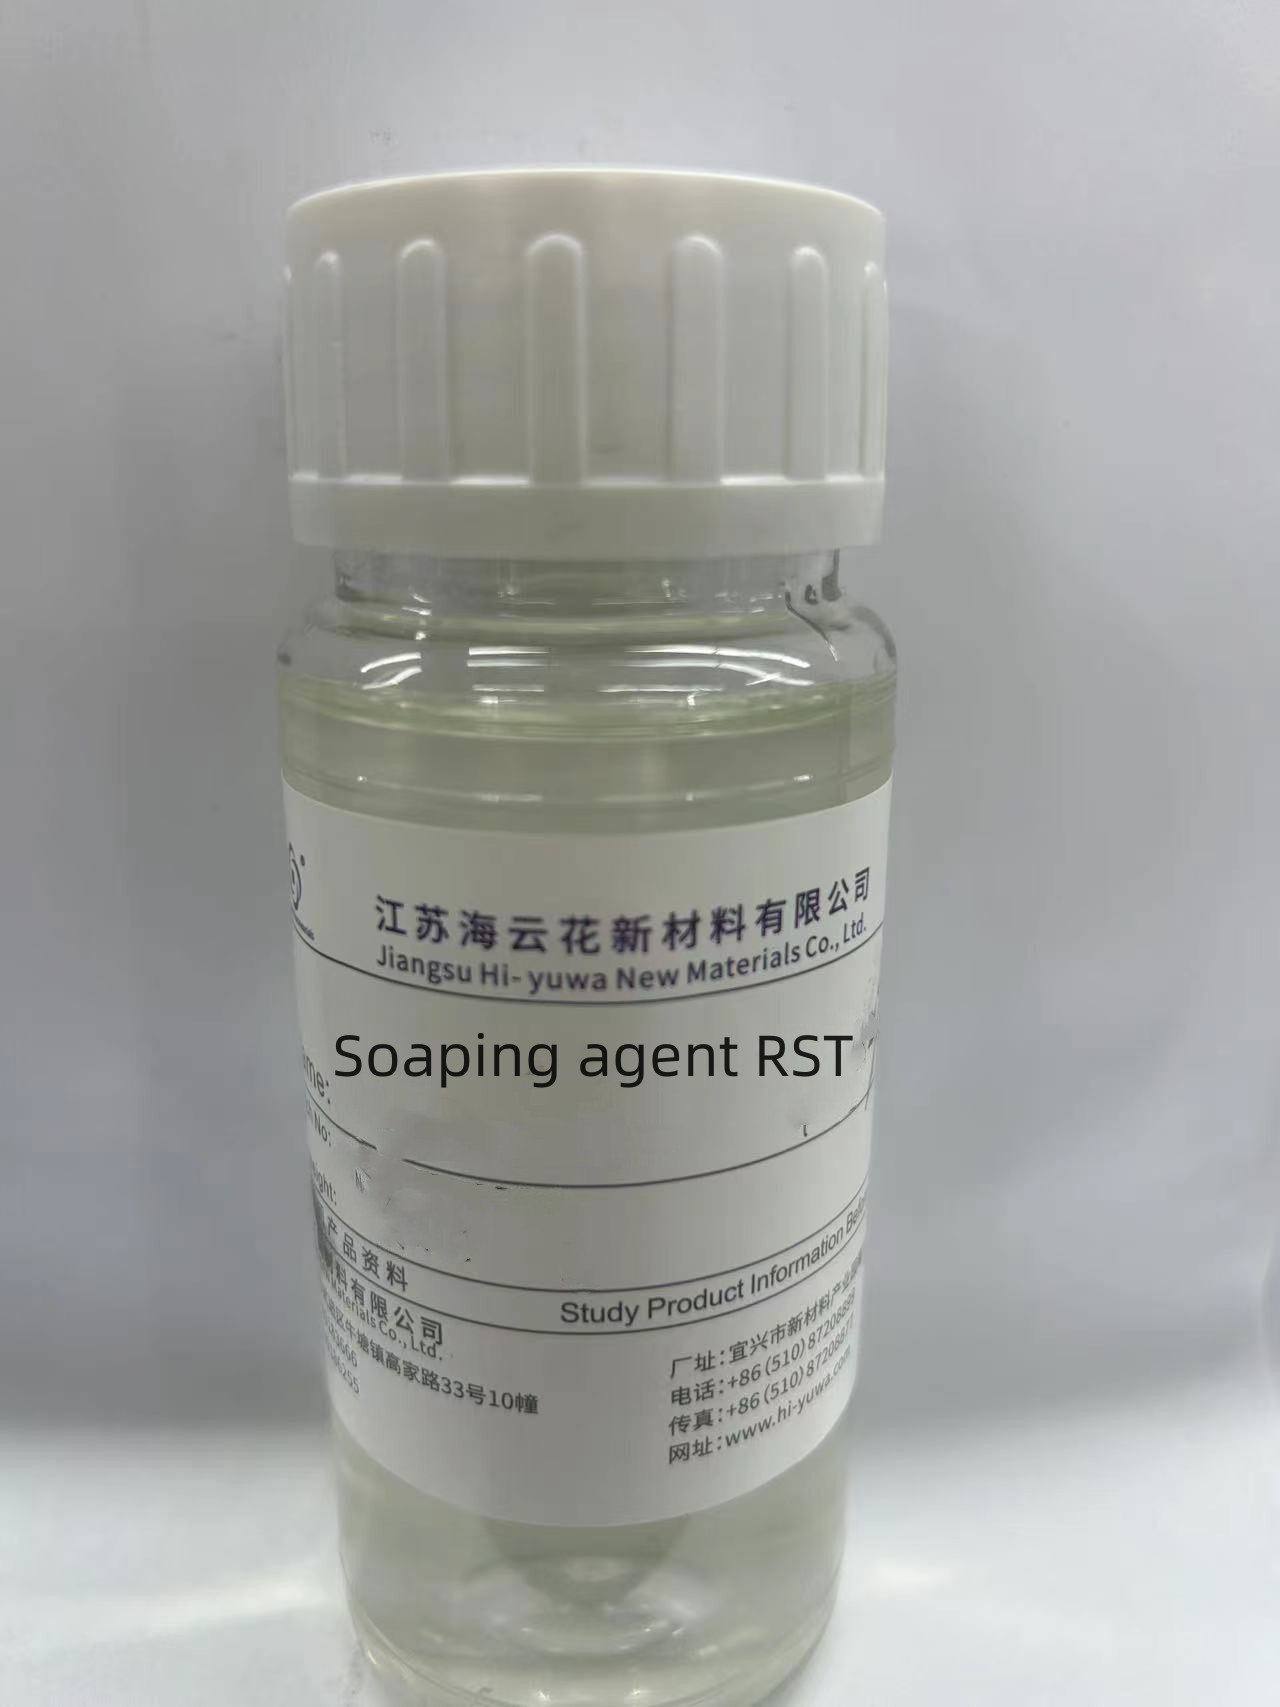 Soaping agent RST